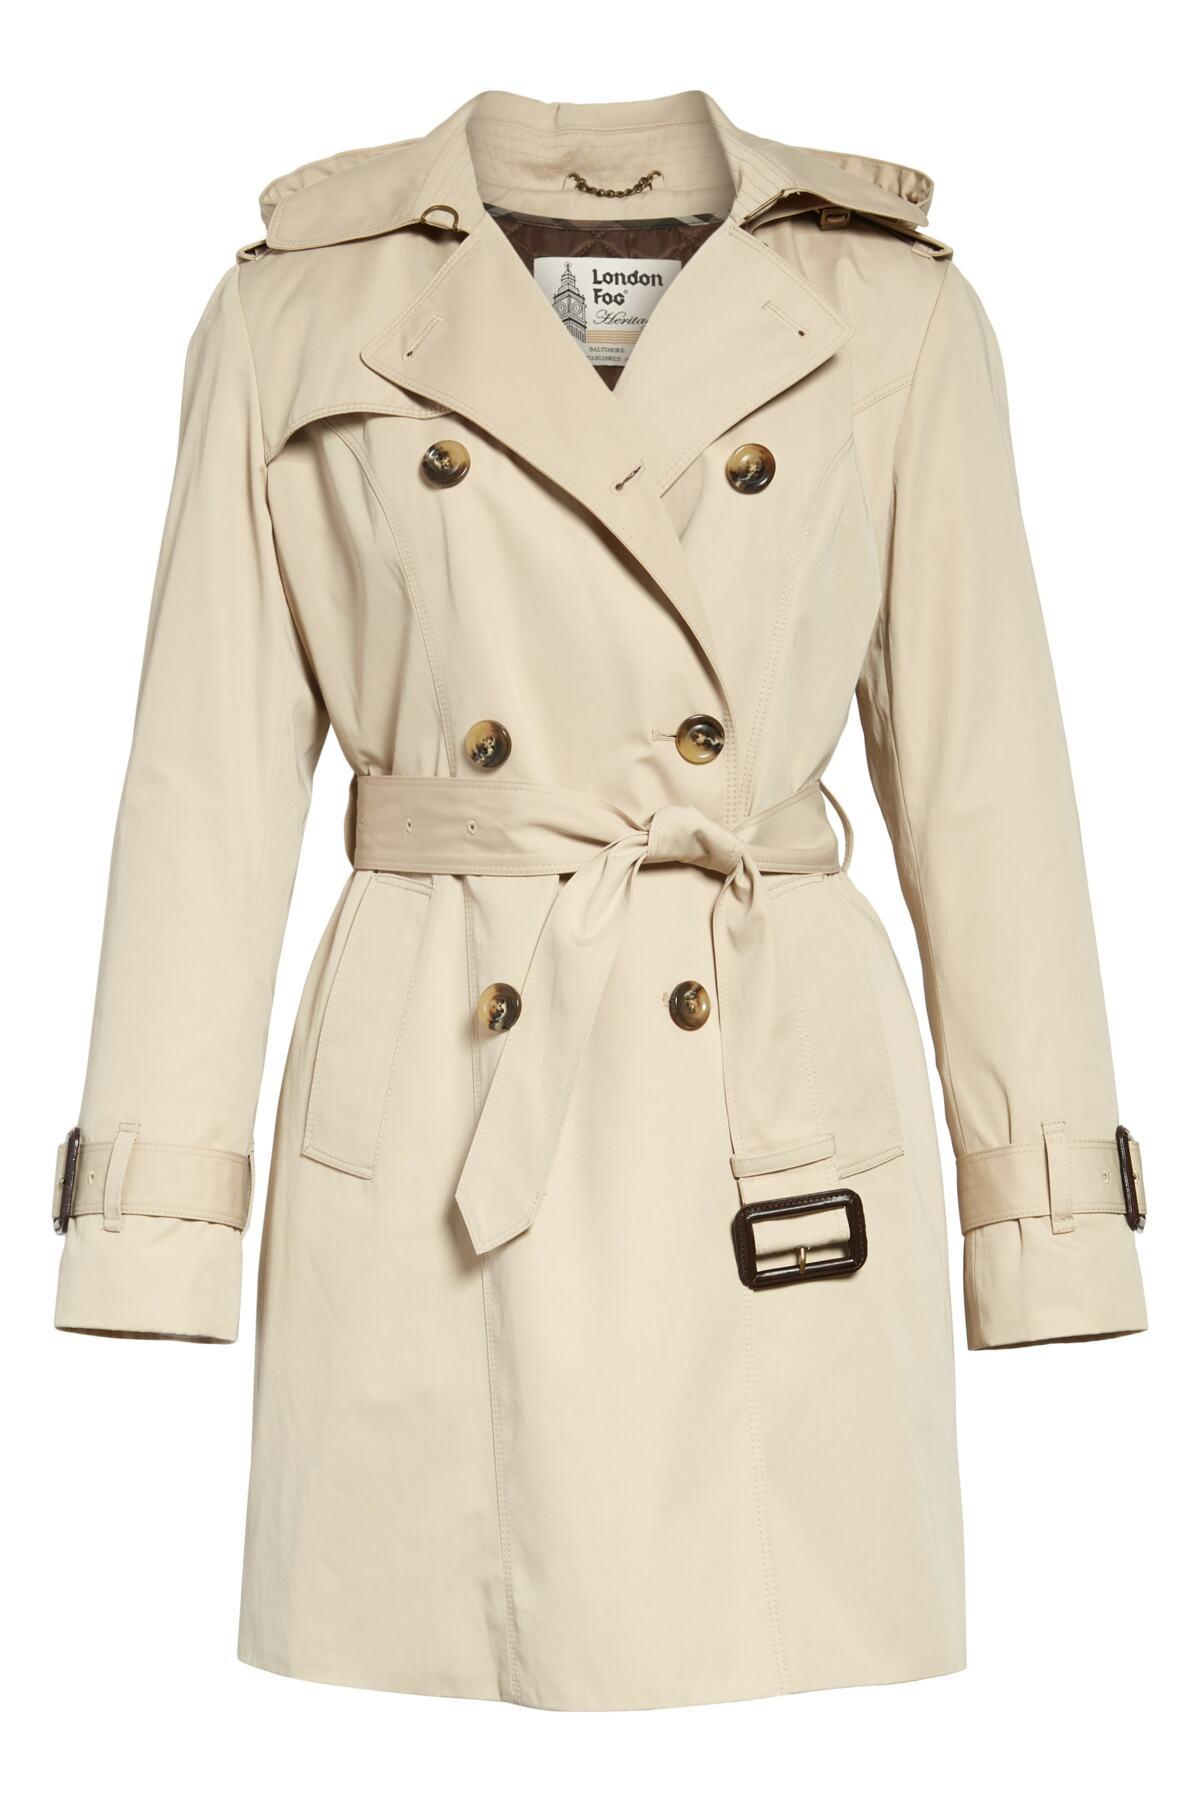 London Fog Heritage Double Breasted Lined Trench Coat (petite) in Beige ...